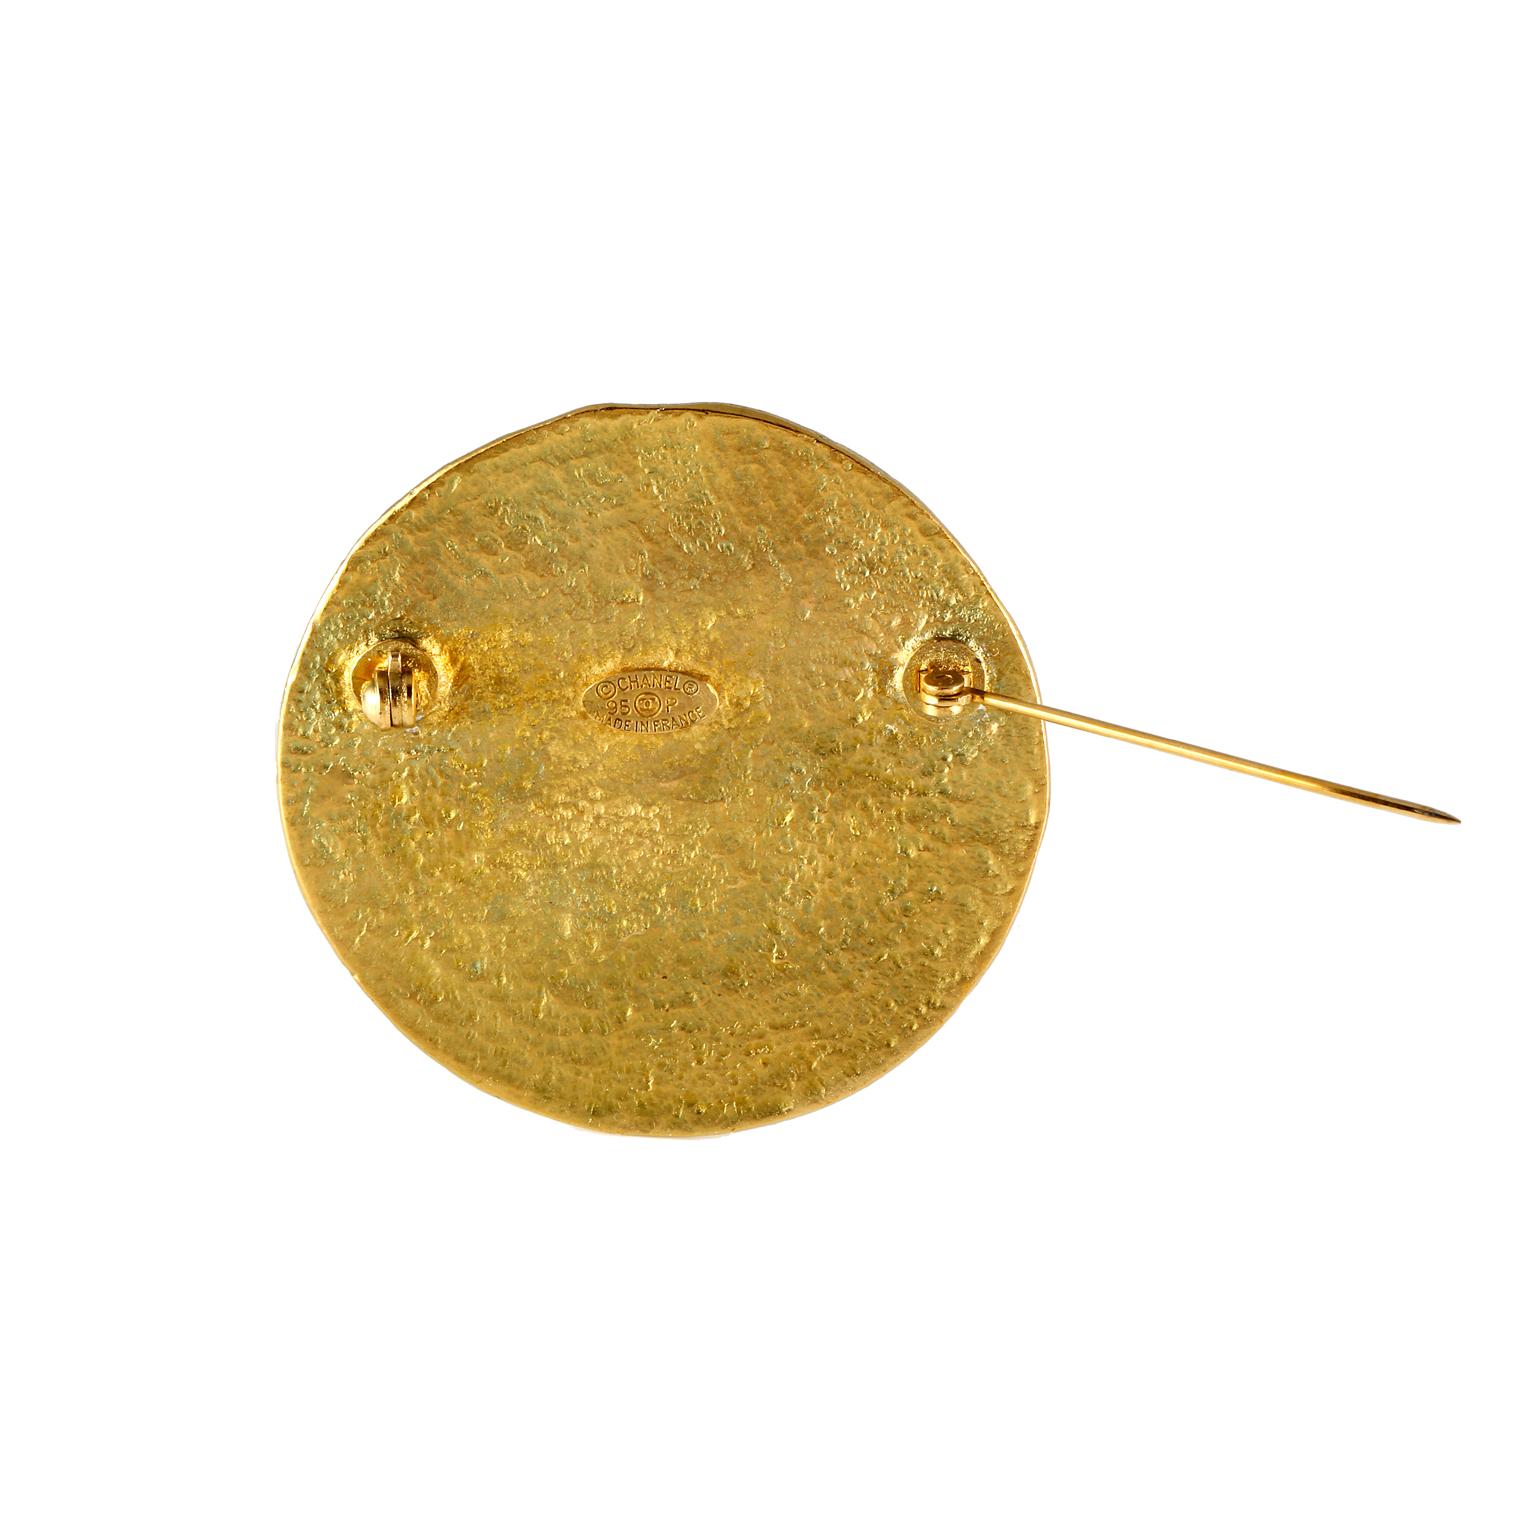 This authentic Chanel Gold CC Coin Pin is in excellent condition from the Spring 1995 collection.  Round gold tone pin has a hammered “ancient” finish with interlocking CC insignia.  Pouch or box included.

 
